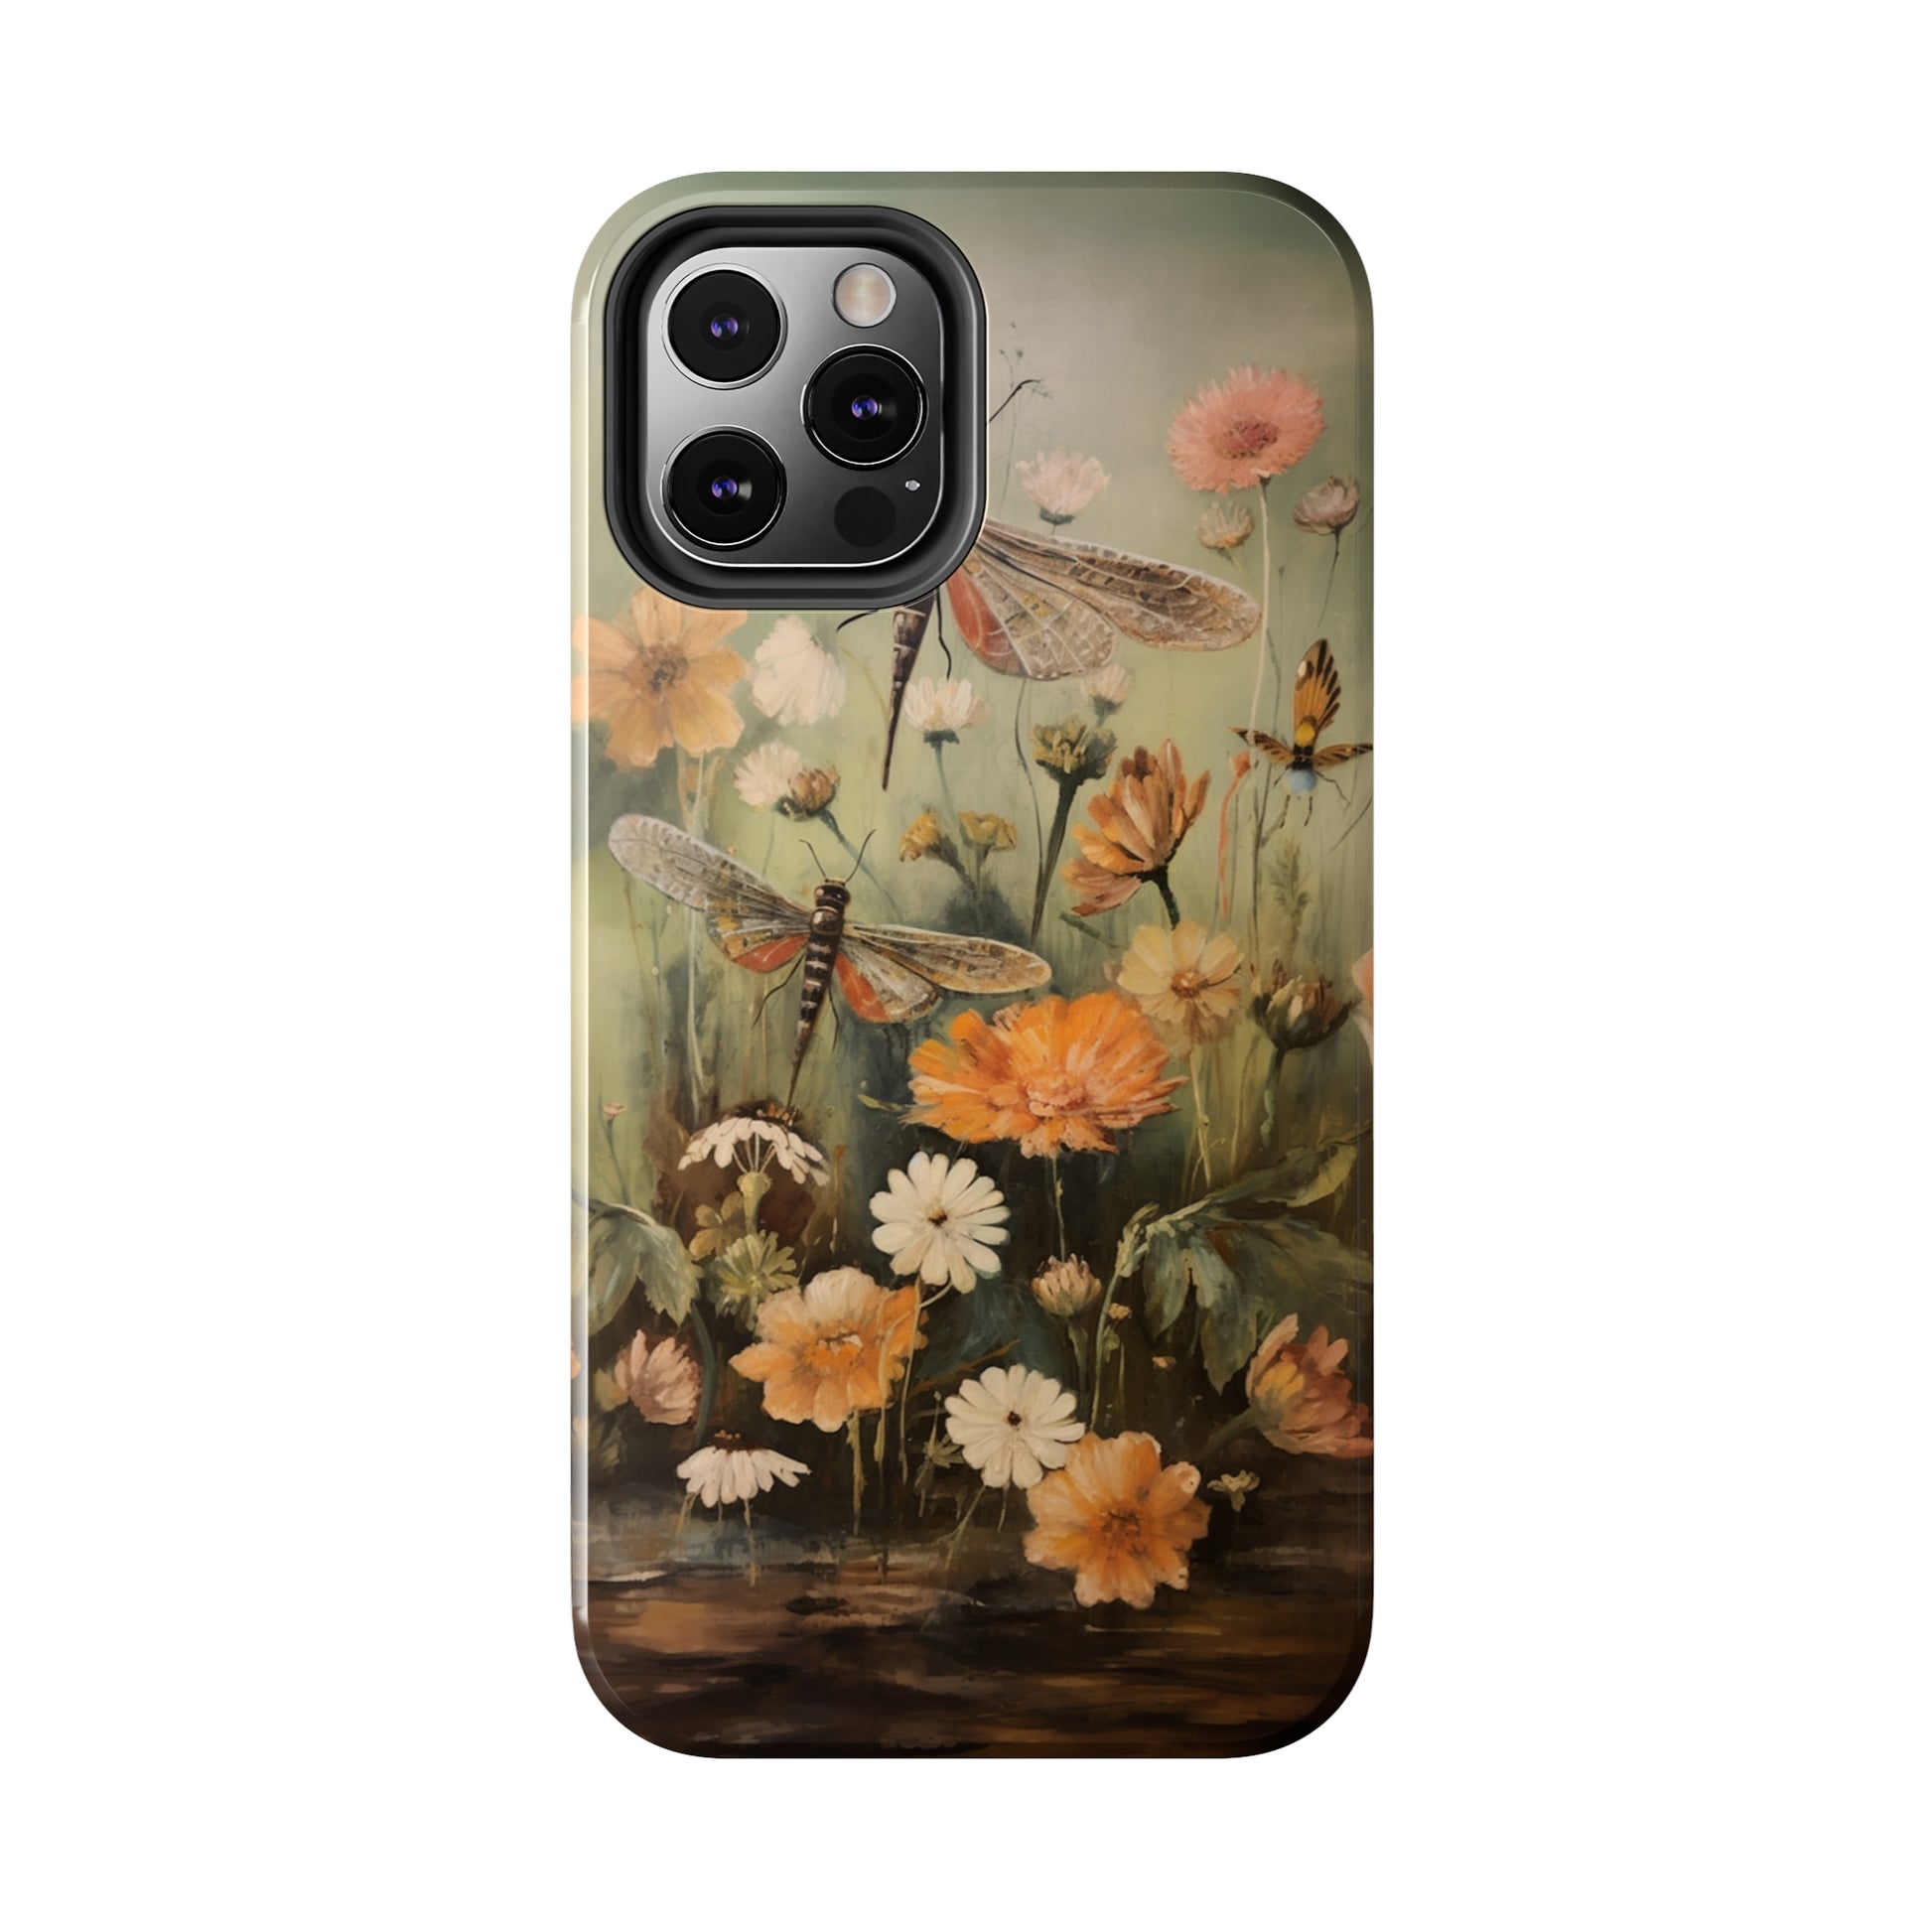 Organic Elegance - Dragonfly and Floral Case